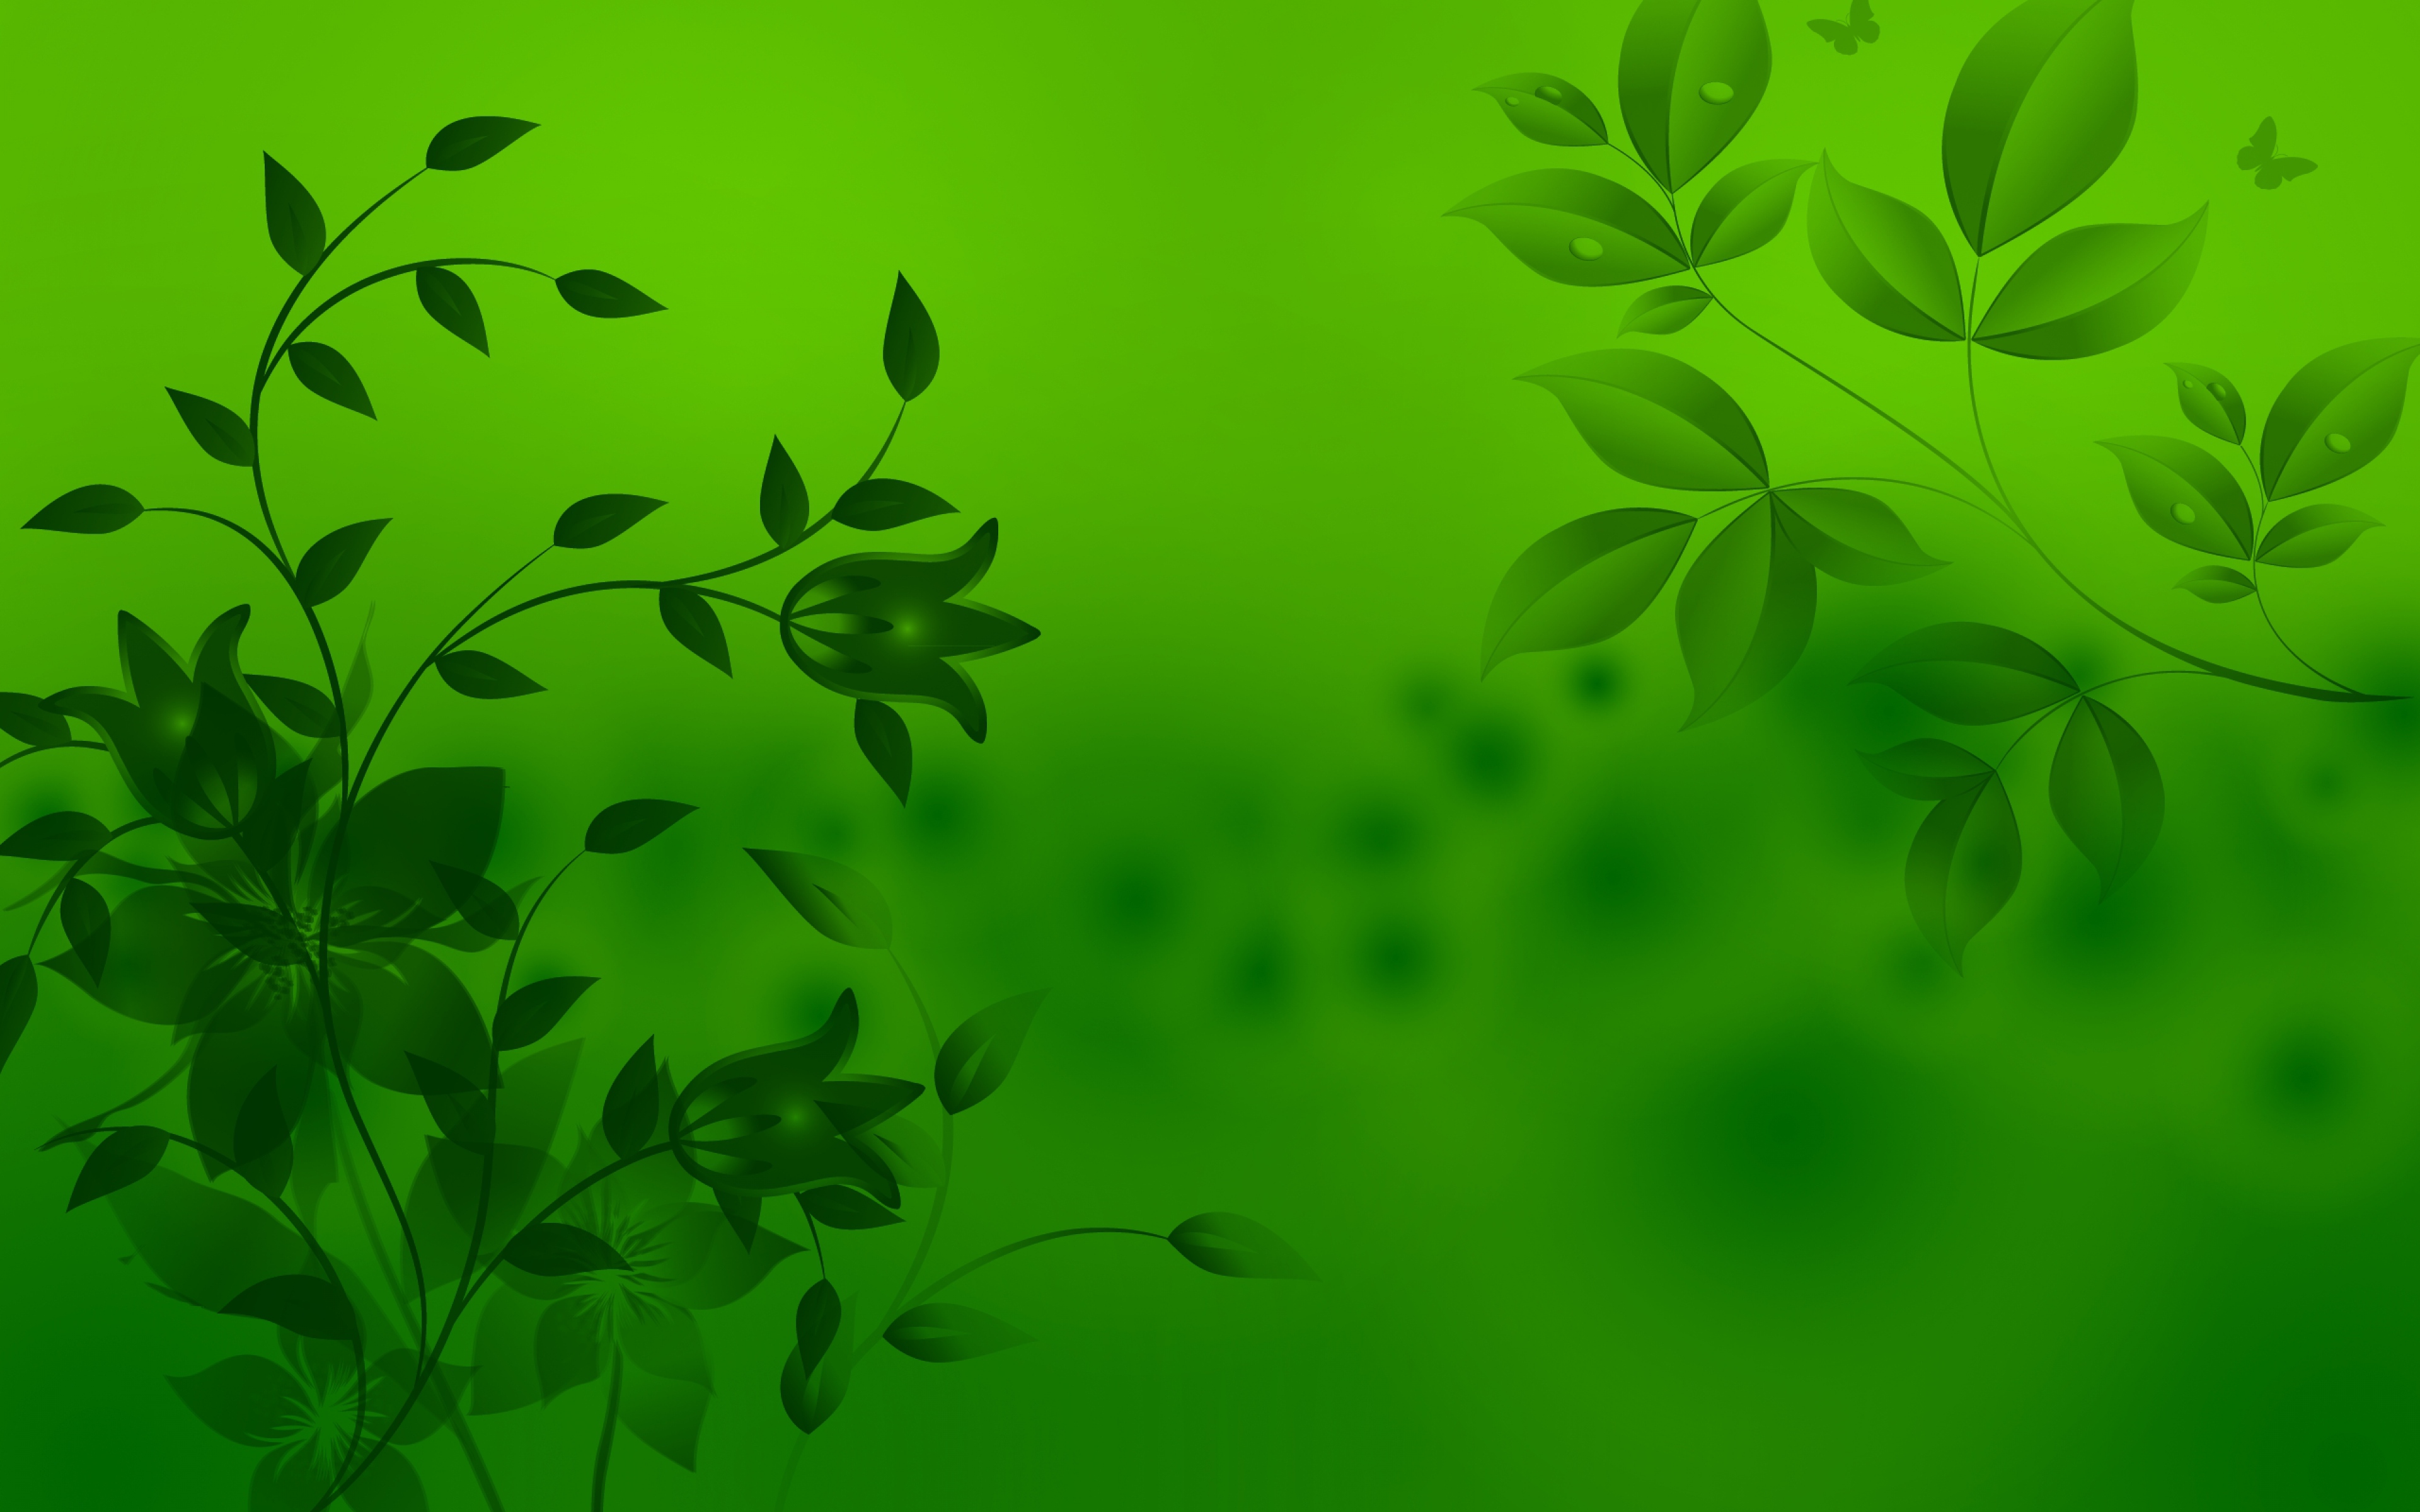 Free download HD Wallpaper with Leaves Image and Green Background HD